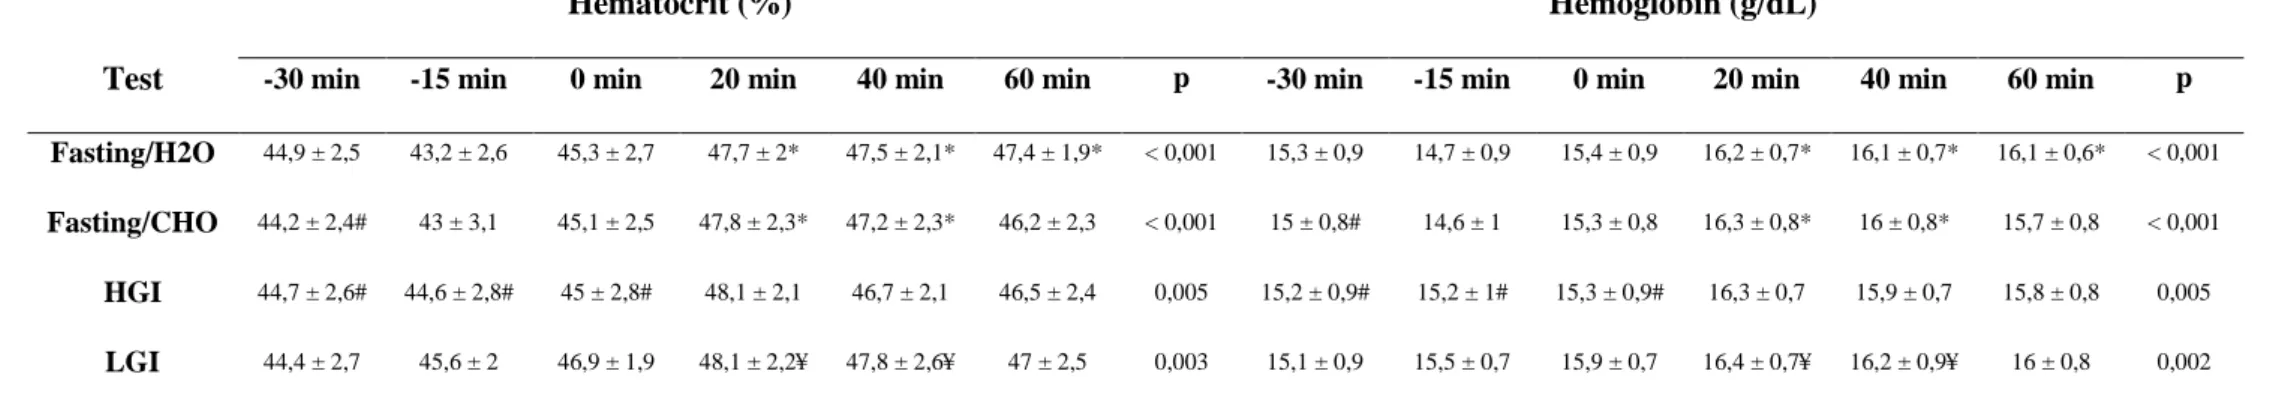 Table 3: Hematocrit and hemoglobin levels during rest and exercise. 